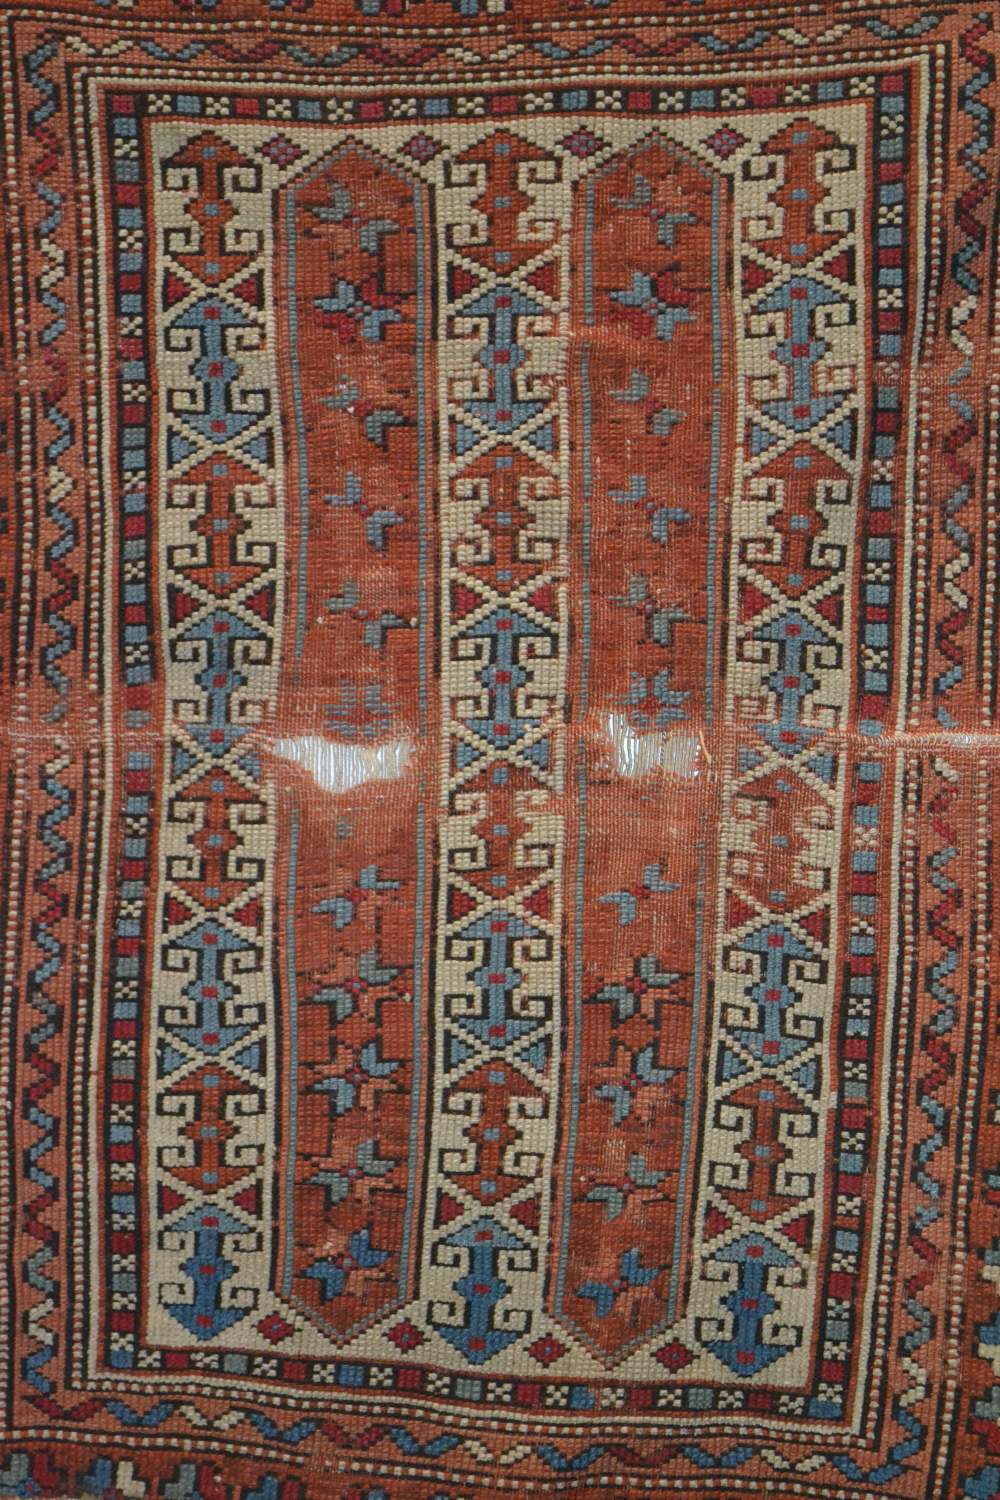 Bergama rug, west Anatolia, probably early 19th century, 3ft. 5in. x 2ft. 7in. 1.04m. x 0.79m. - Image 2 of 5